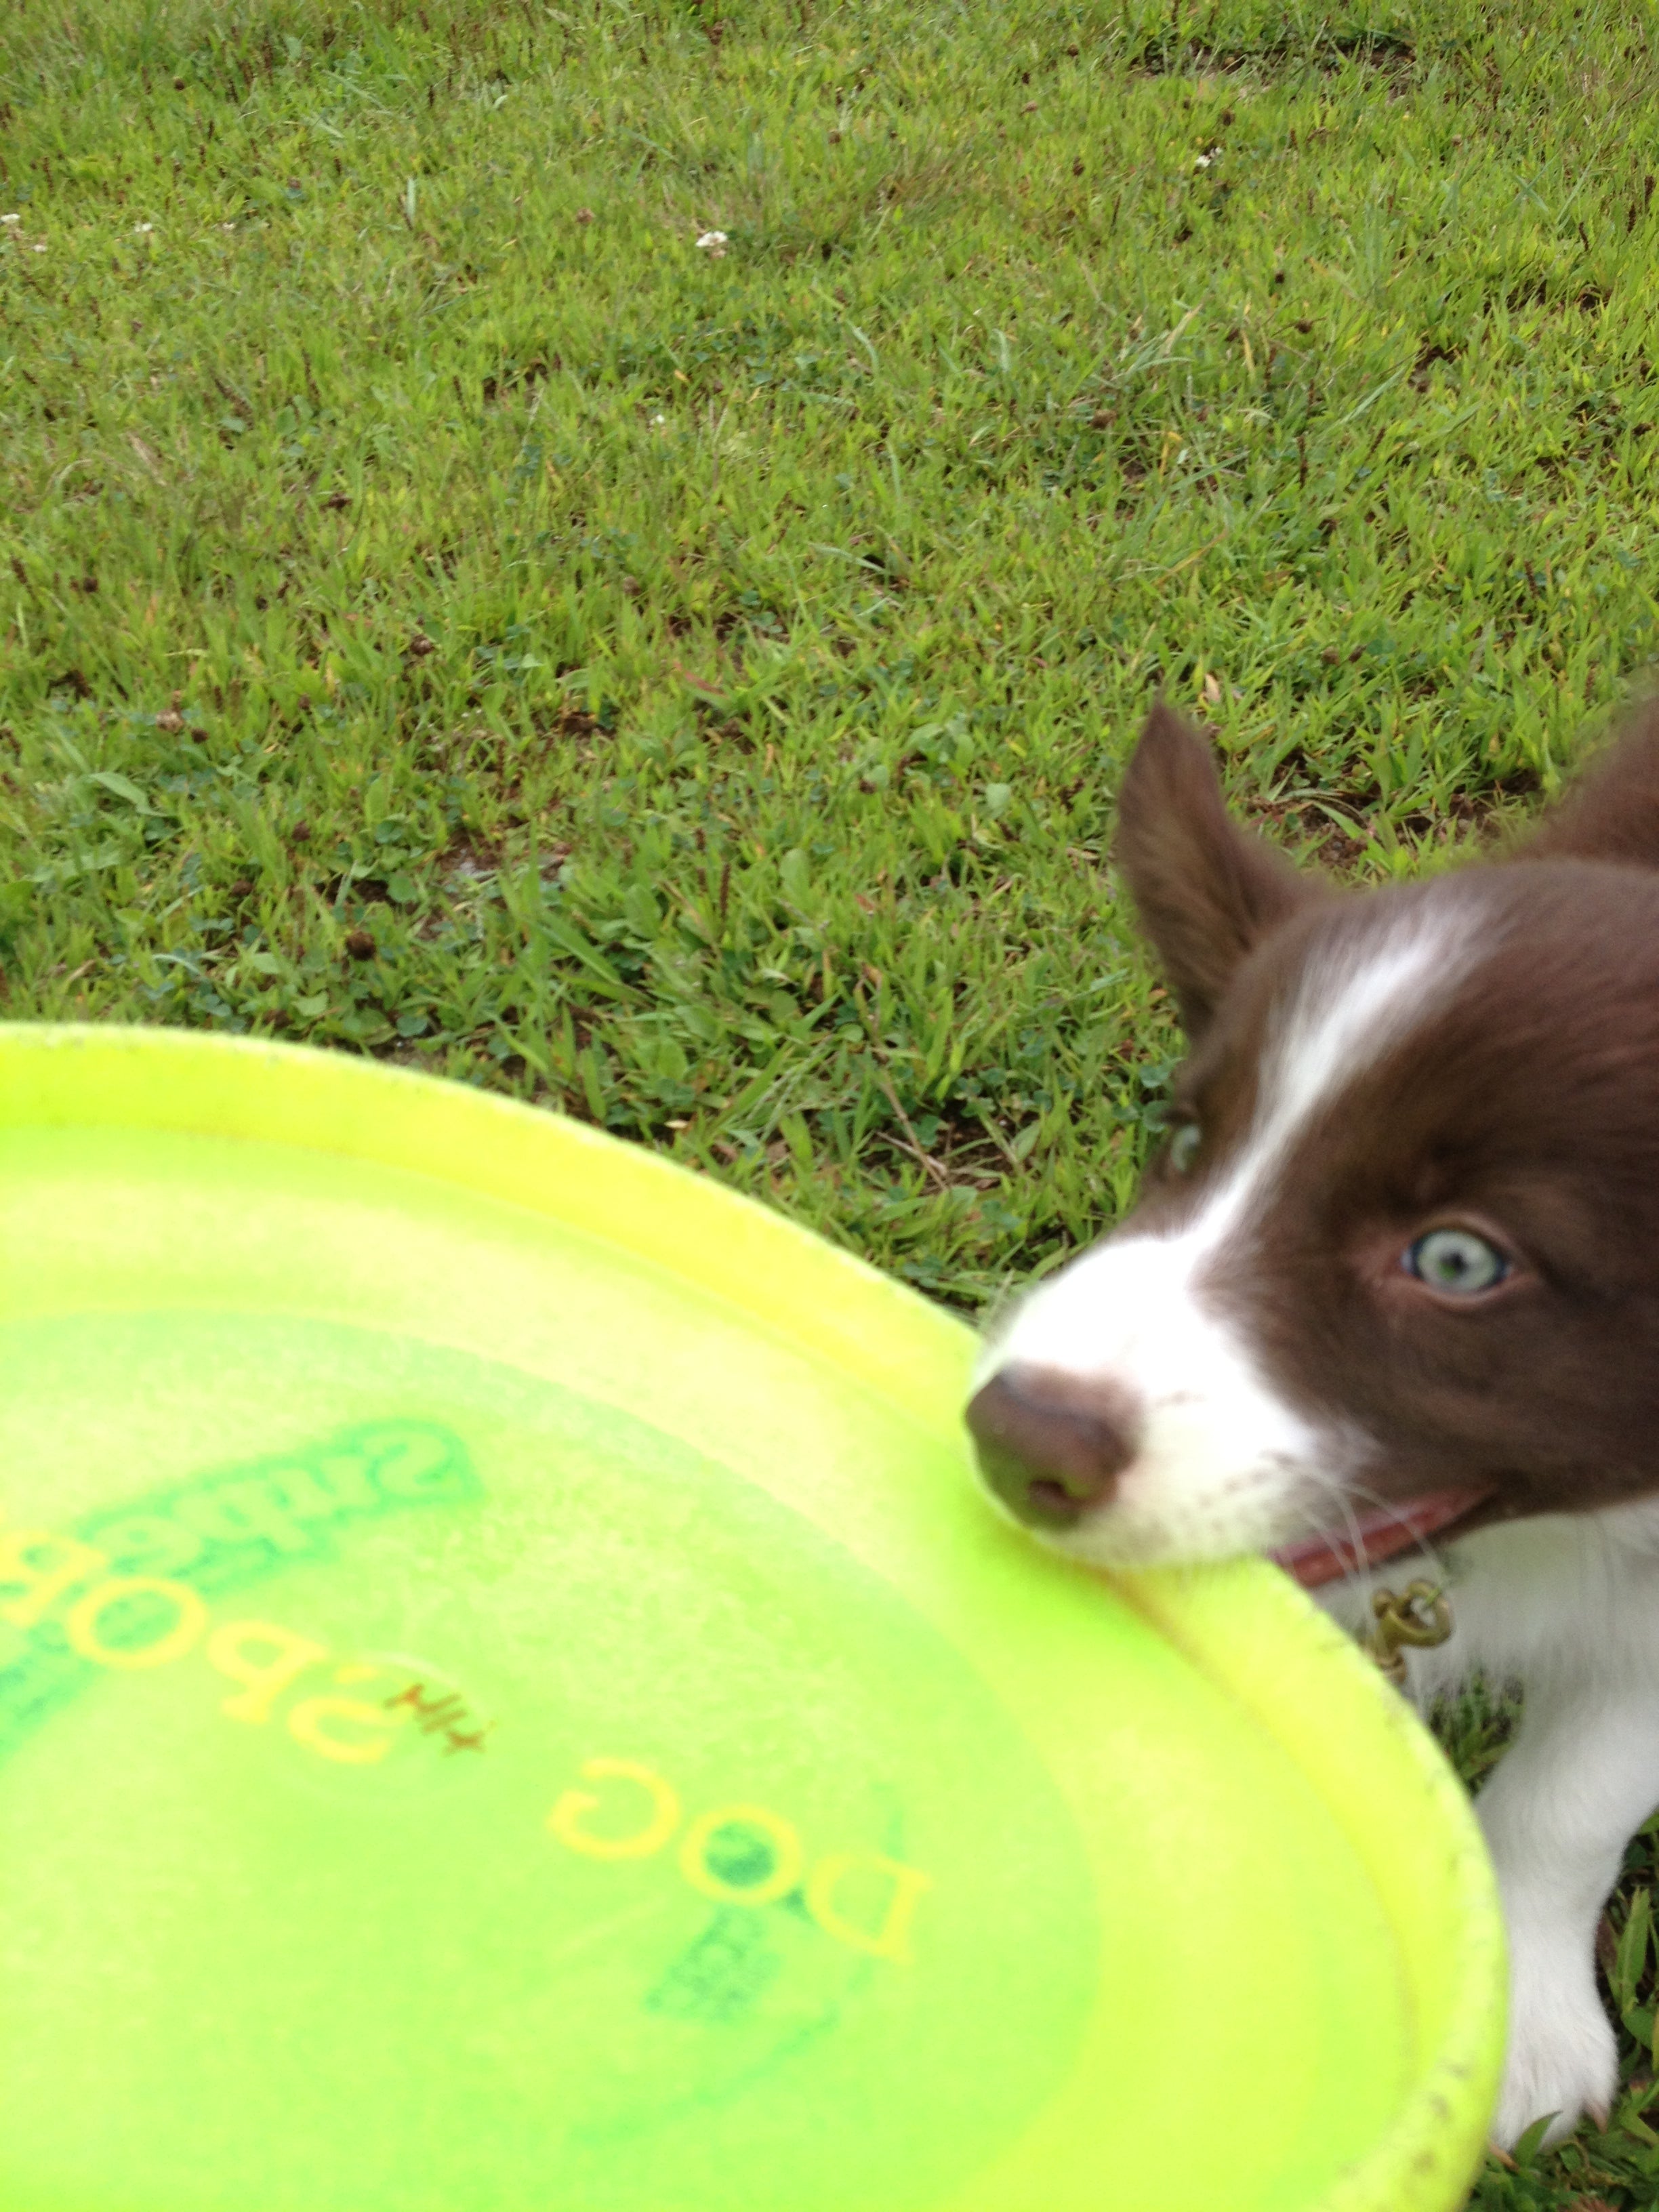 The Award-Winning Disc Dog that Once Couldn't Fetch